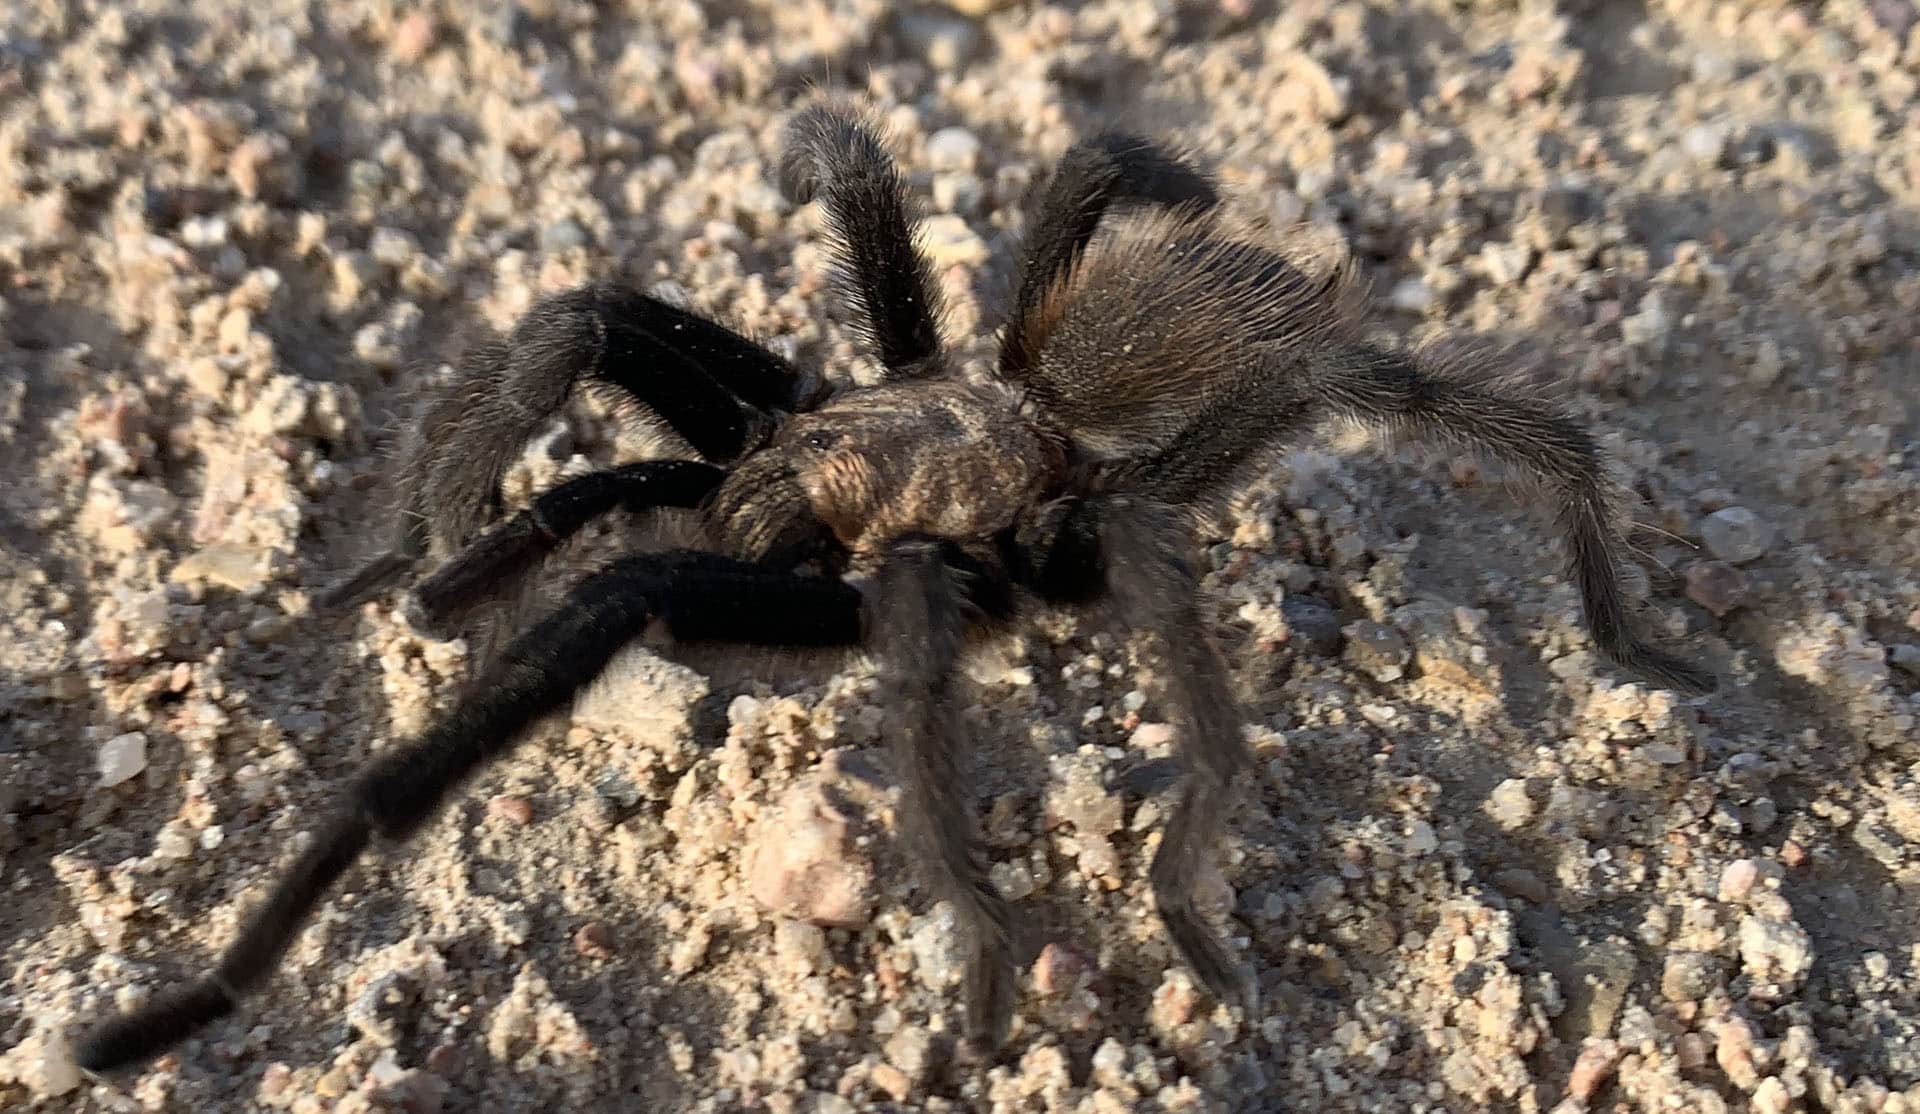 A spider walking on the ground at Comanche National Grasslands.